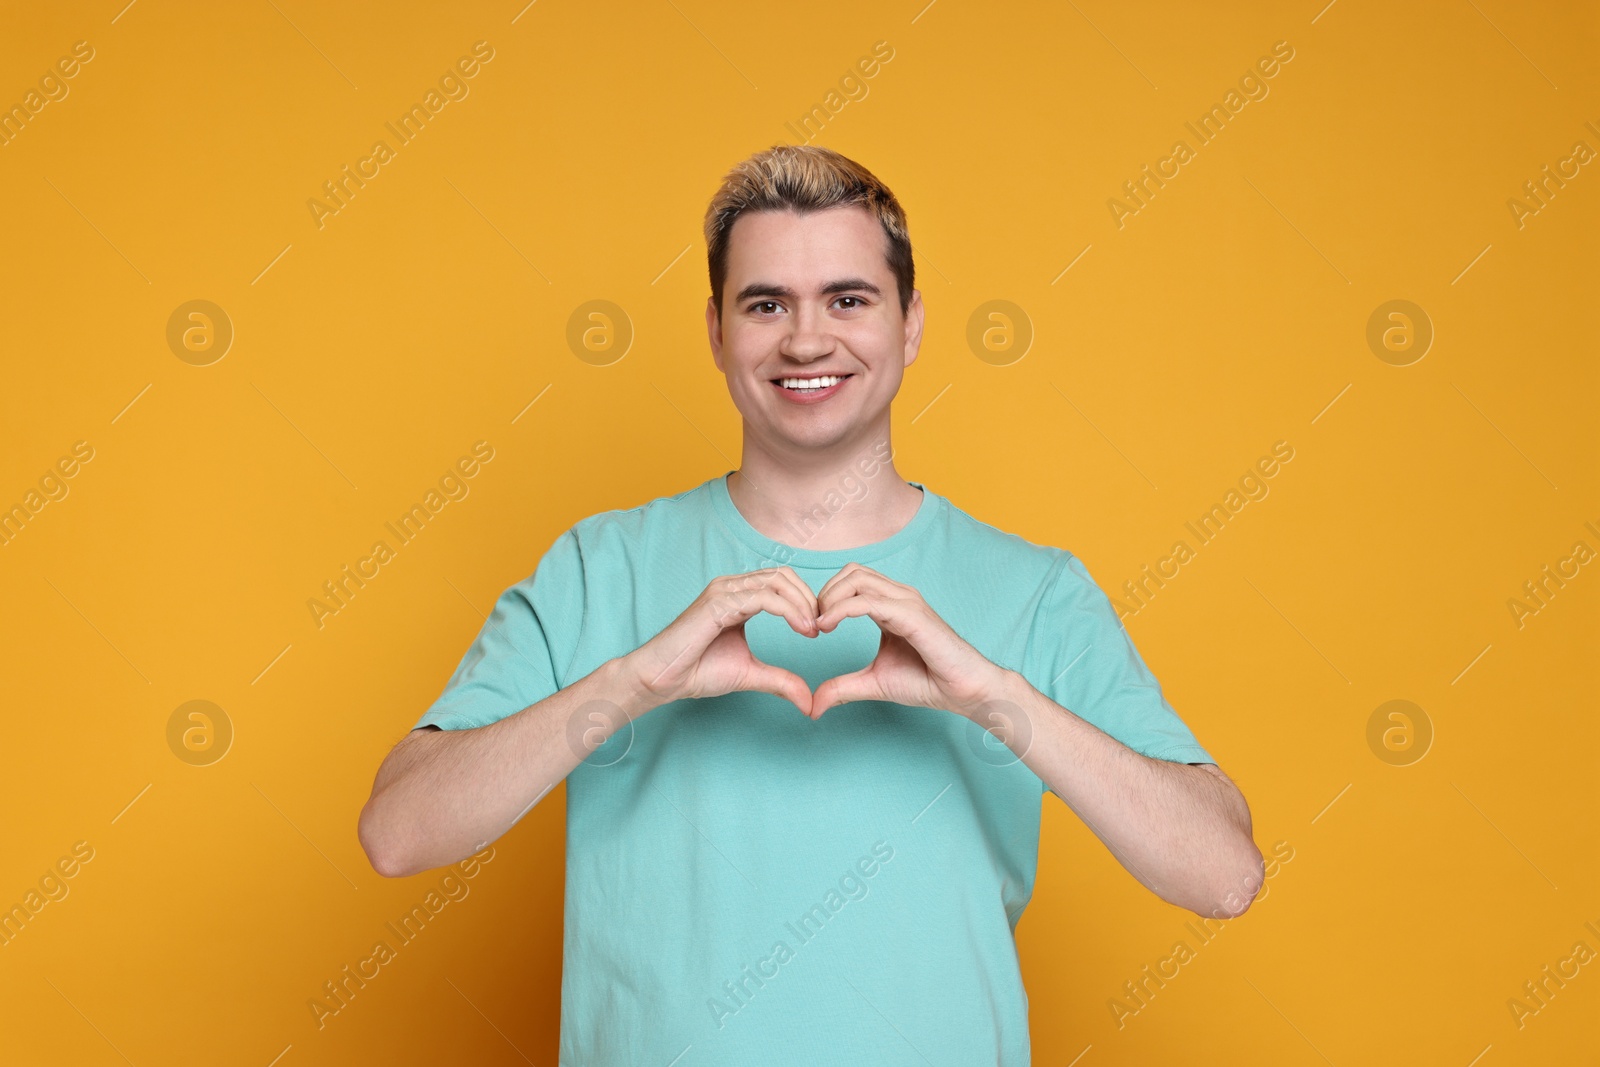 Photo of Young man showing heart gesture with hands on orange background